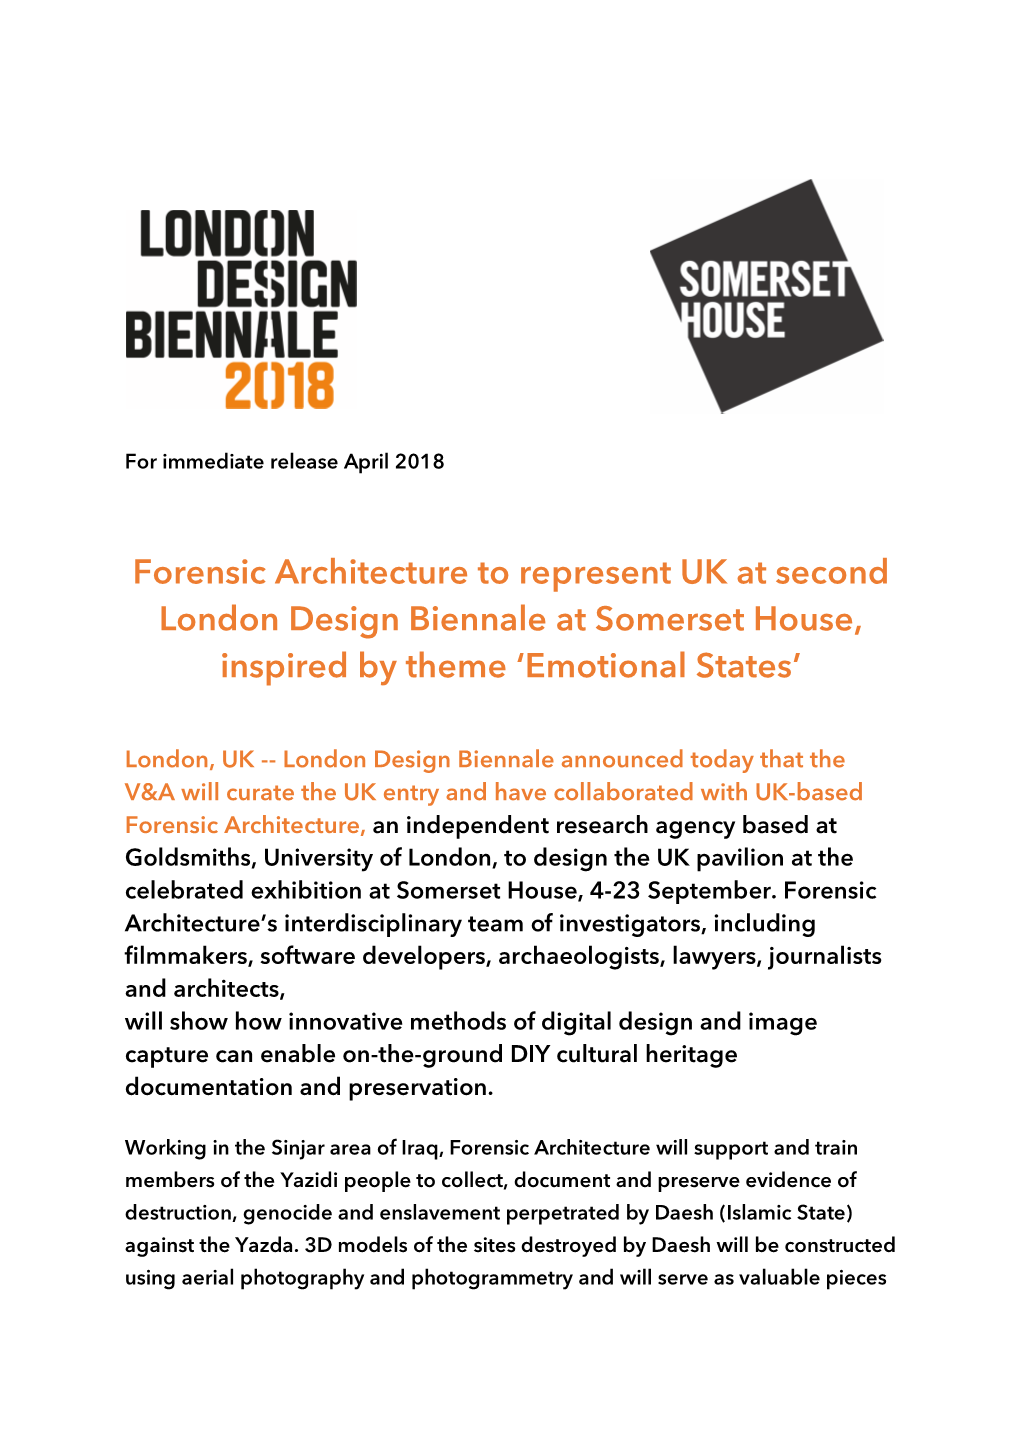 Forensic Architecture to Represent UK at Second London Design Biennale at Somerset House, Inspired by Theme ‘Emotional States’